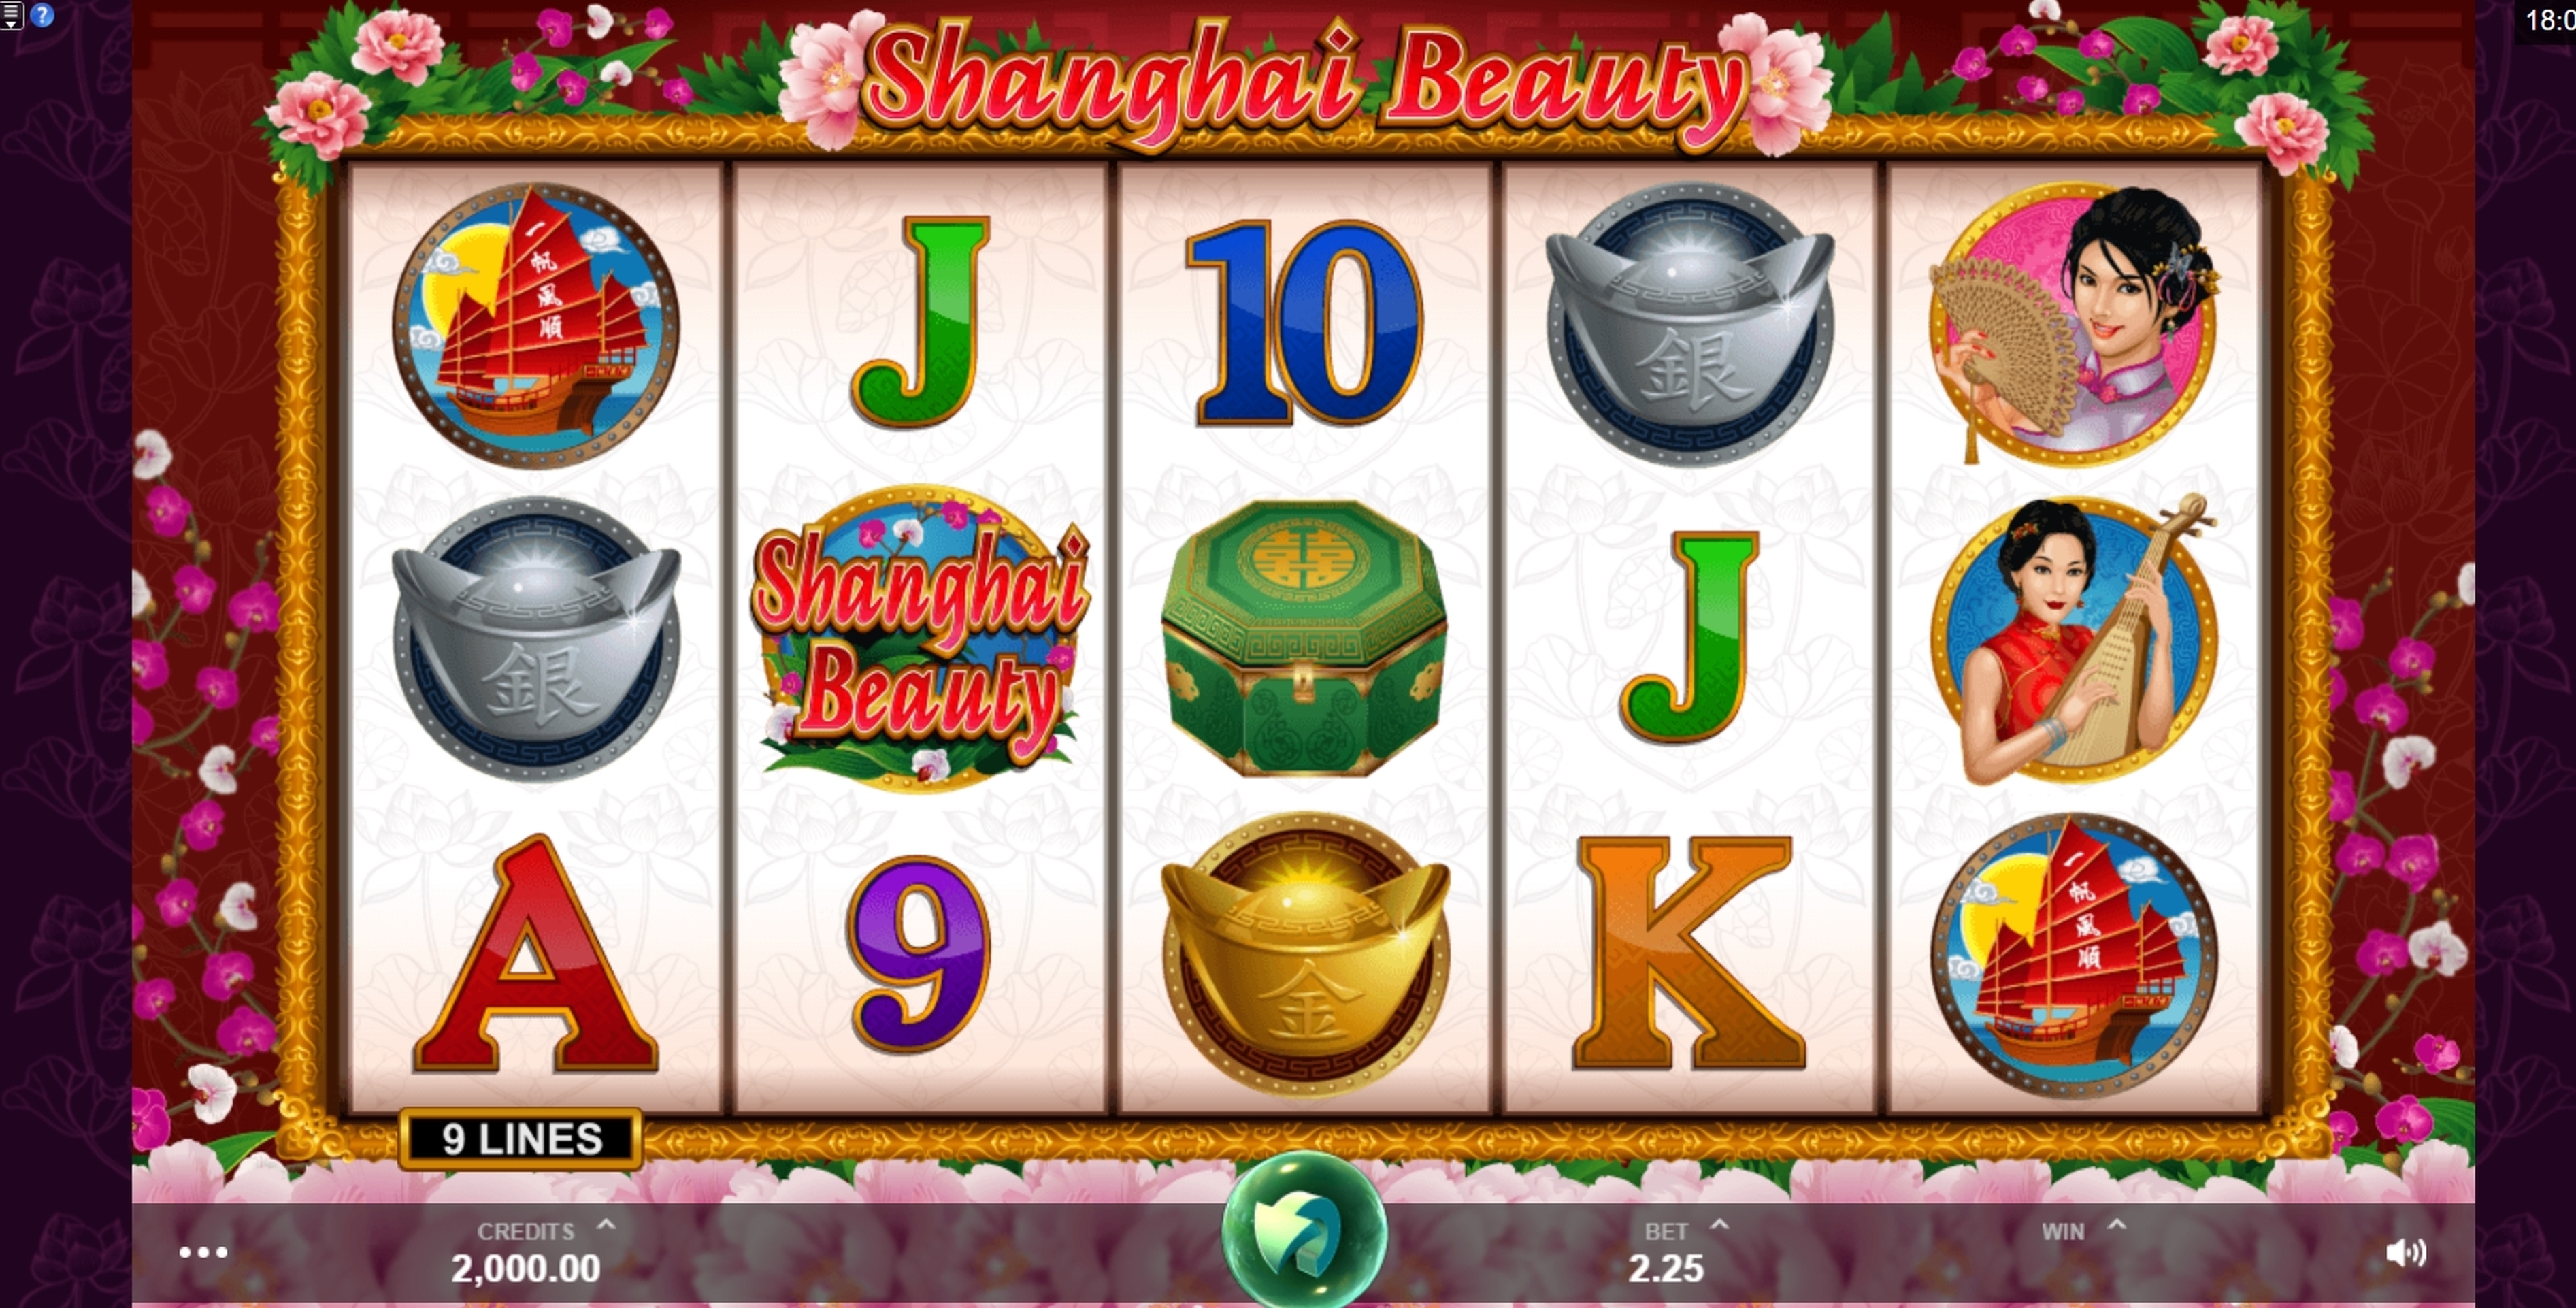 Reels in Shanghai Beauty Slot Game by MahiGaming